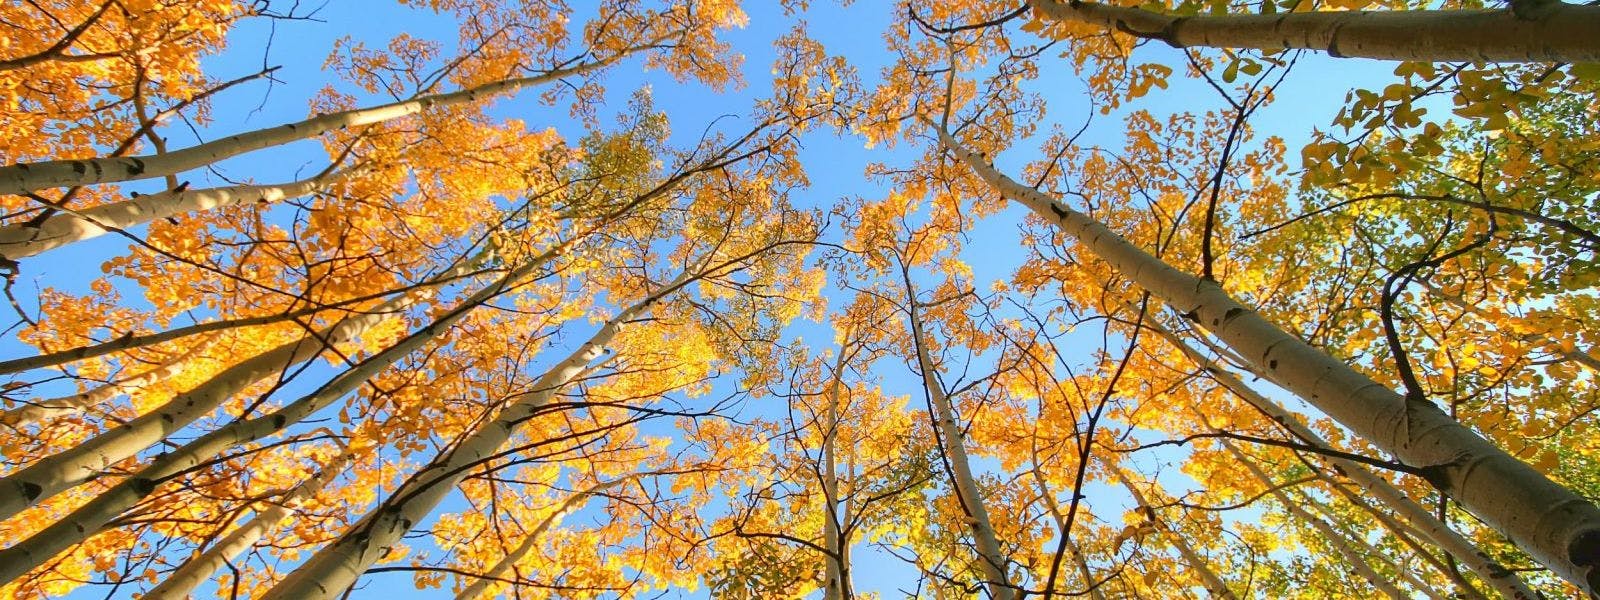 GREAT WAYS TO ENJOY FALL FOLIAGE IN CHARLOTTESVILLE